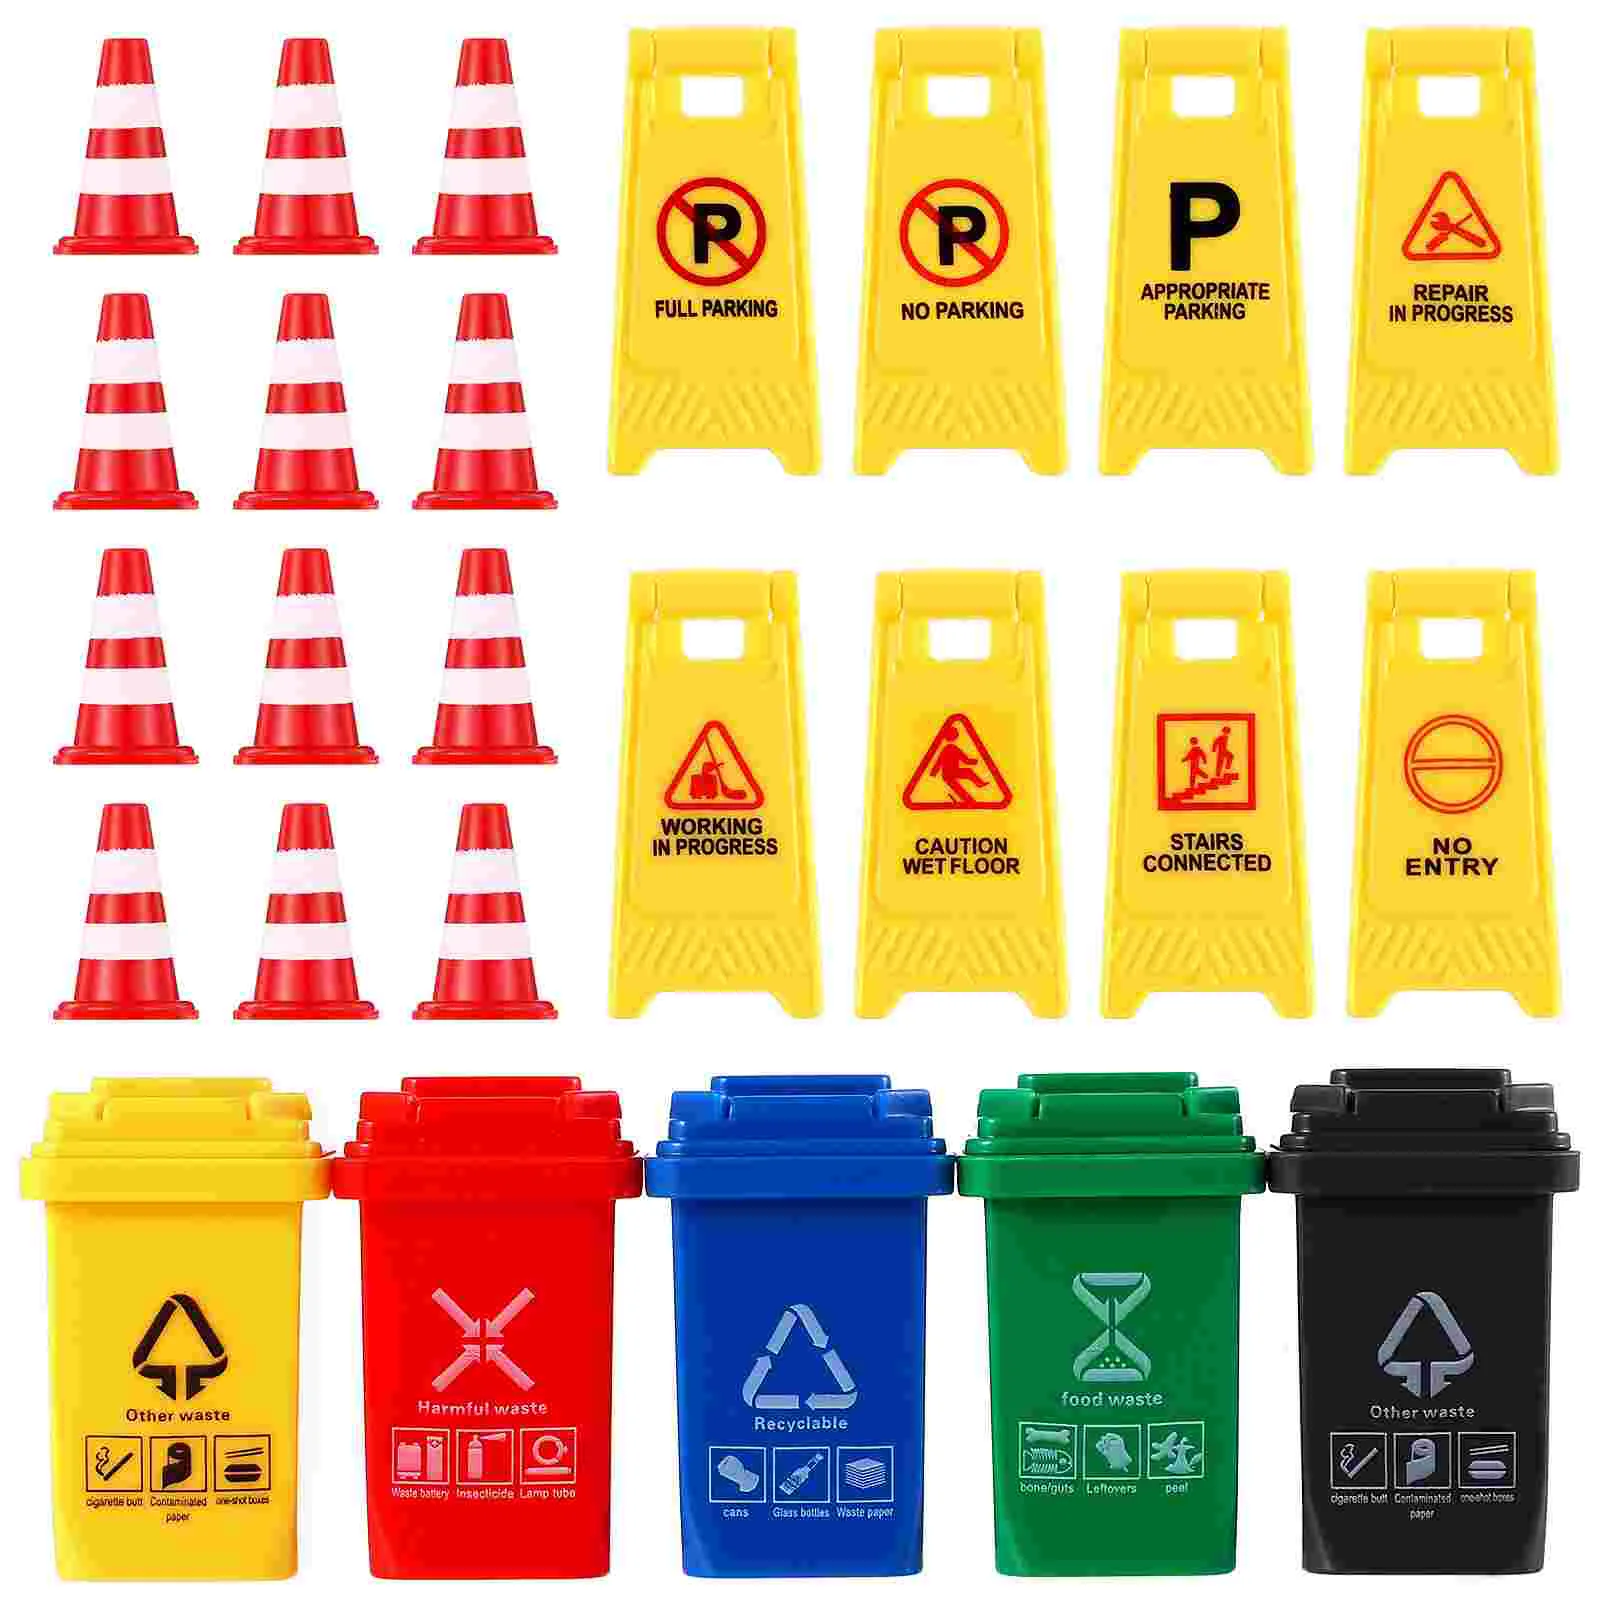 

25 Pcs Kidcraft Playset Teaching Cognitive Toys Trash Cans Traffic Signs Ornament Road Game Plastic Child